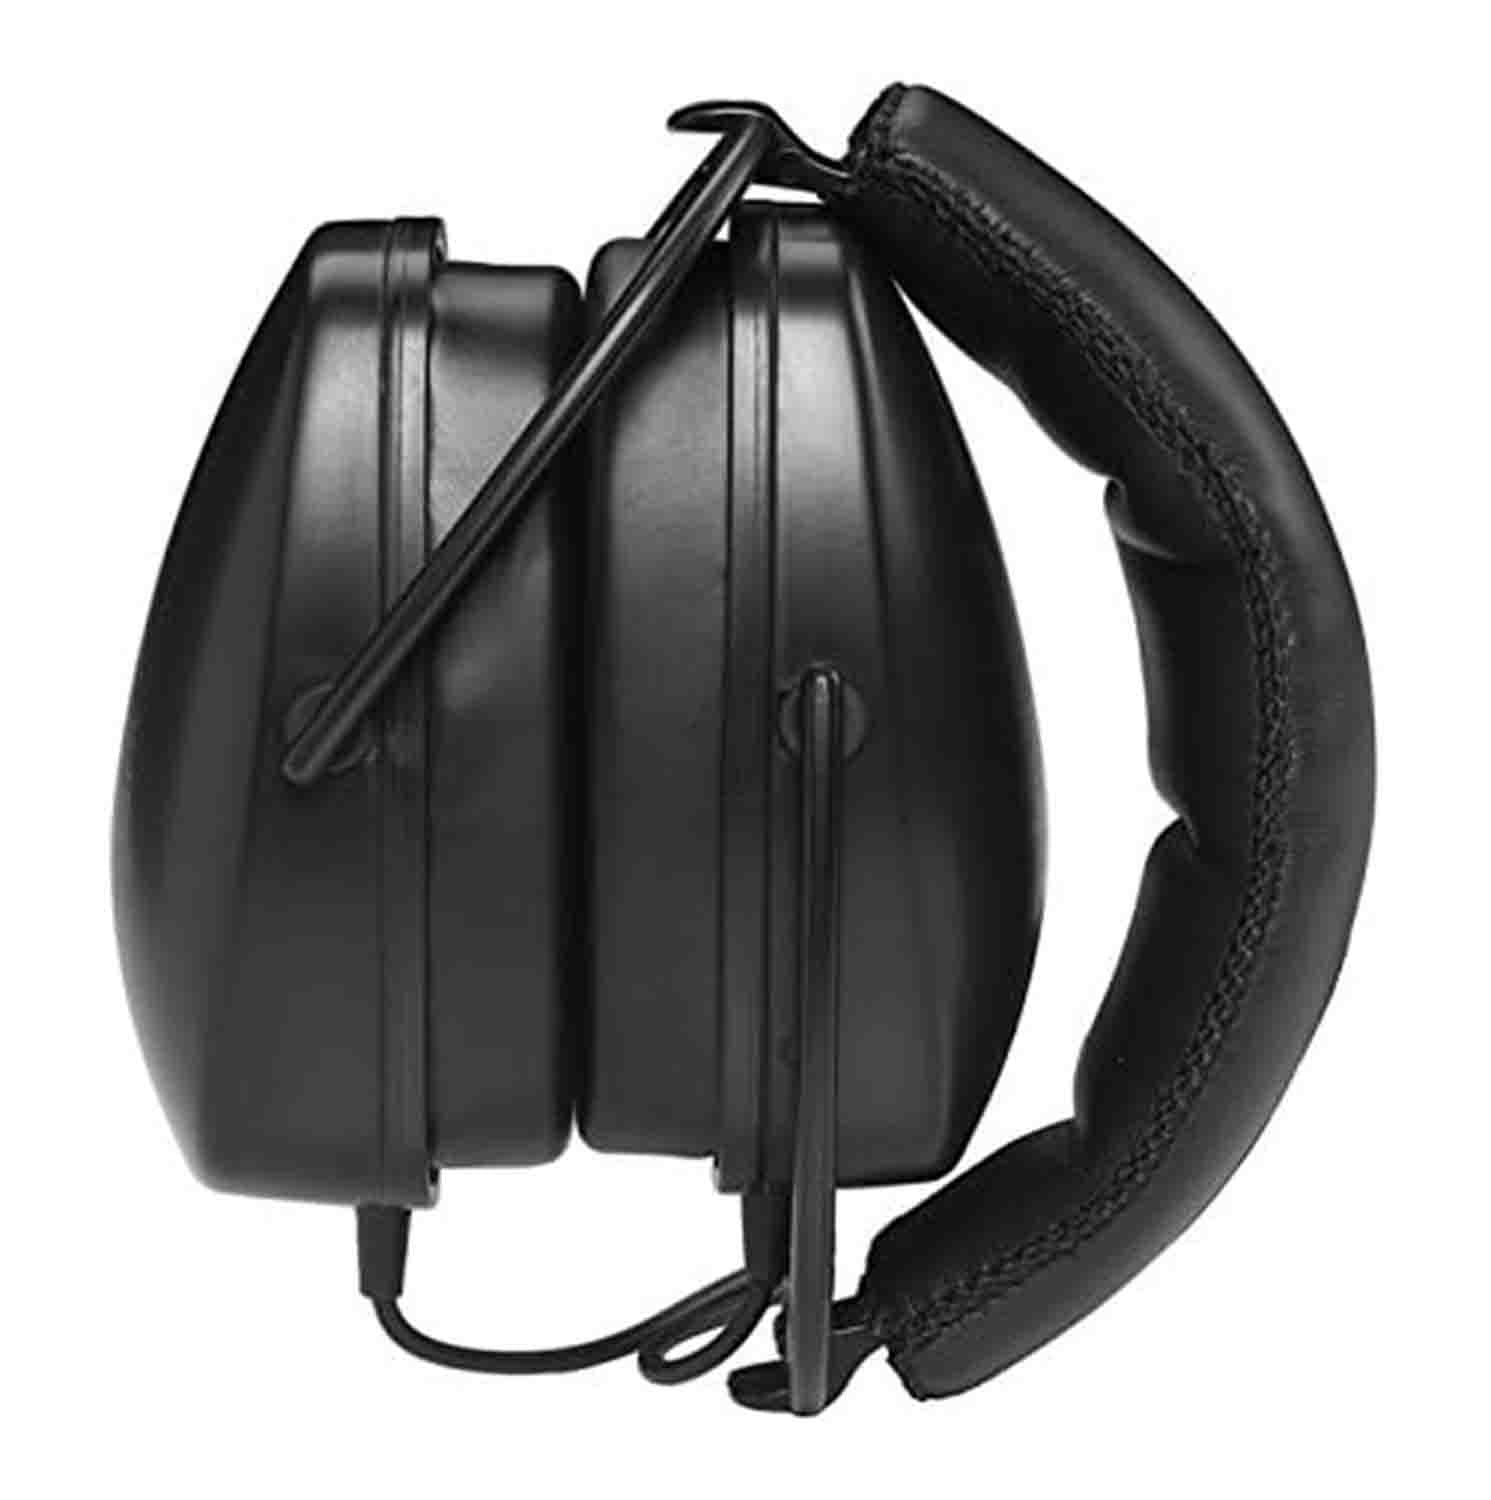 B-Stock: Direct Sound EX-29 Dynamic Closed Headphones with 10' Headphone Extension Cable - Black - Hollywood DJ